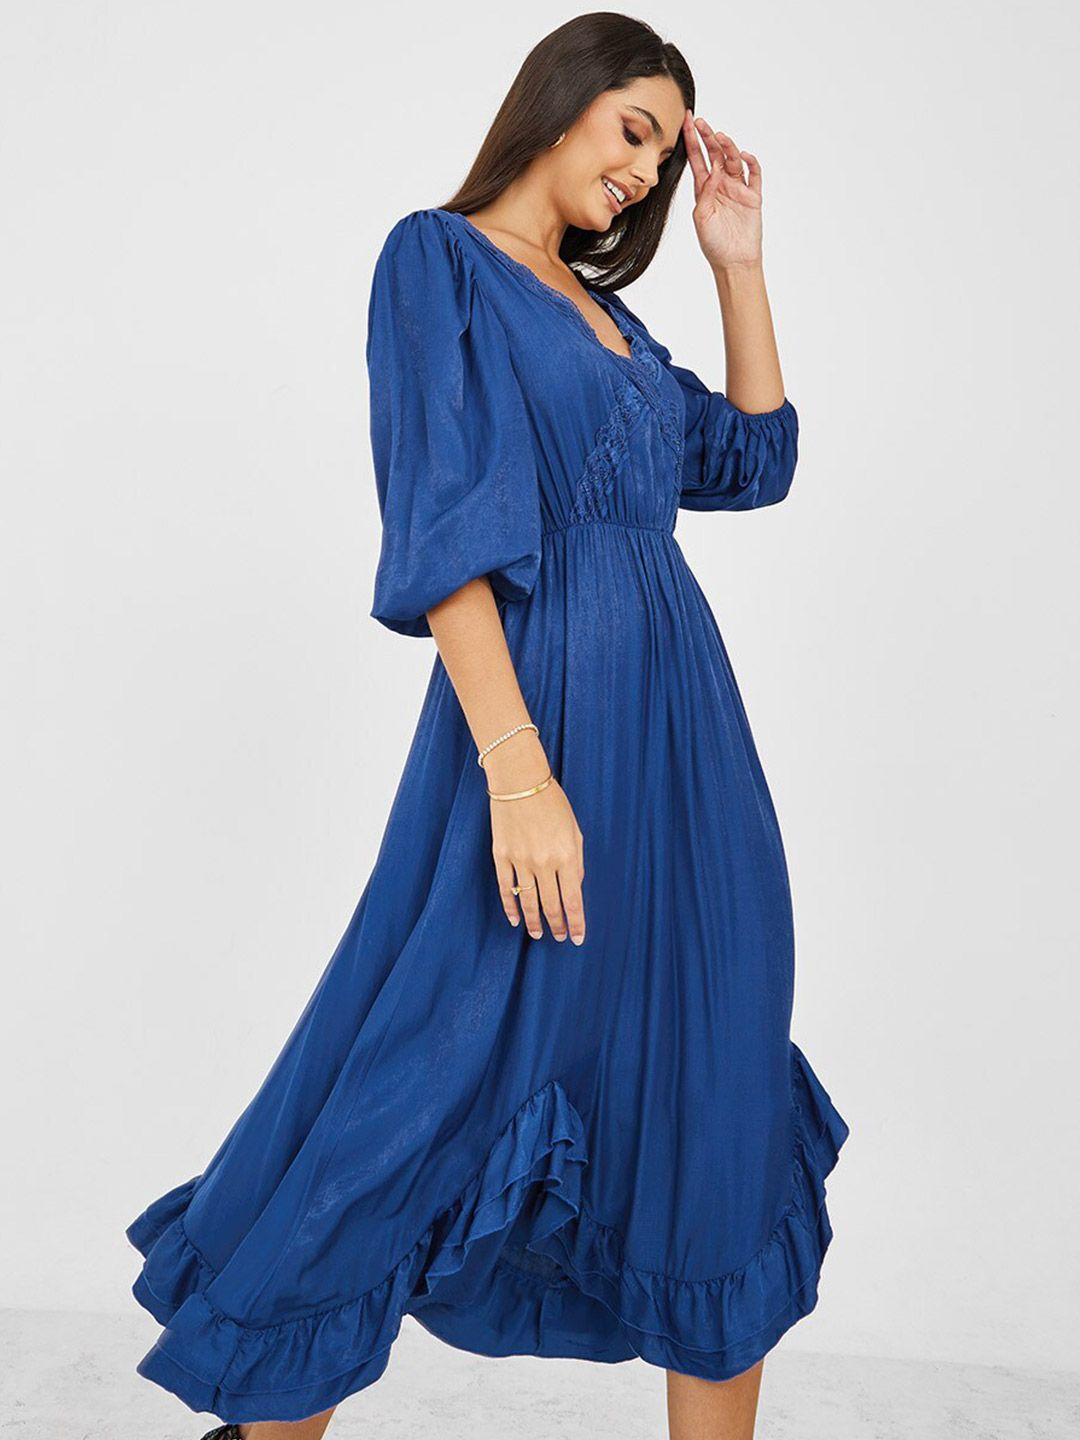 styli v-neck puff sleeves ruffle detail fit & flare dress